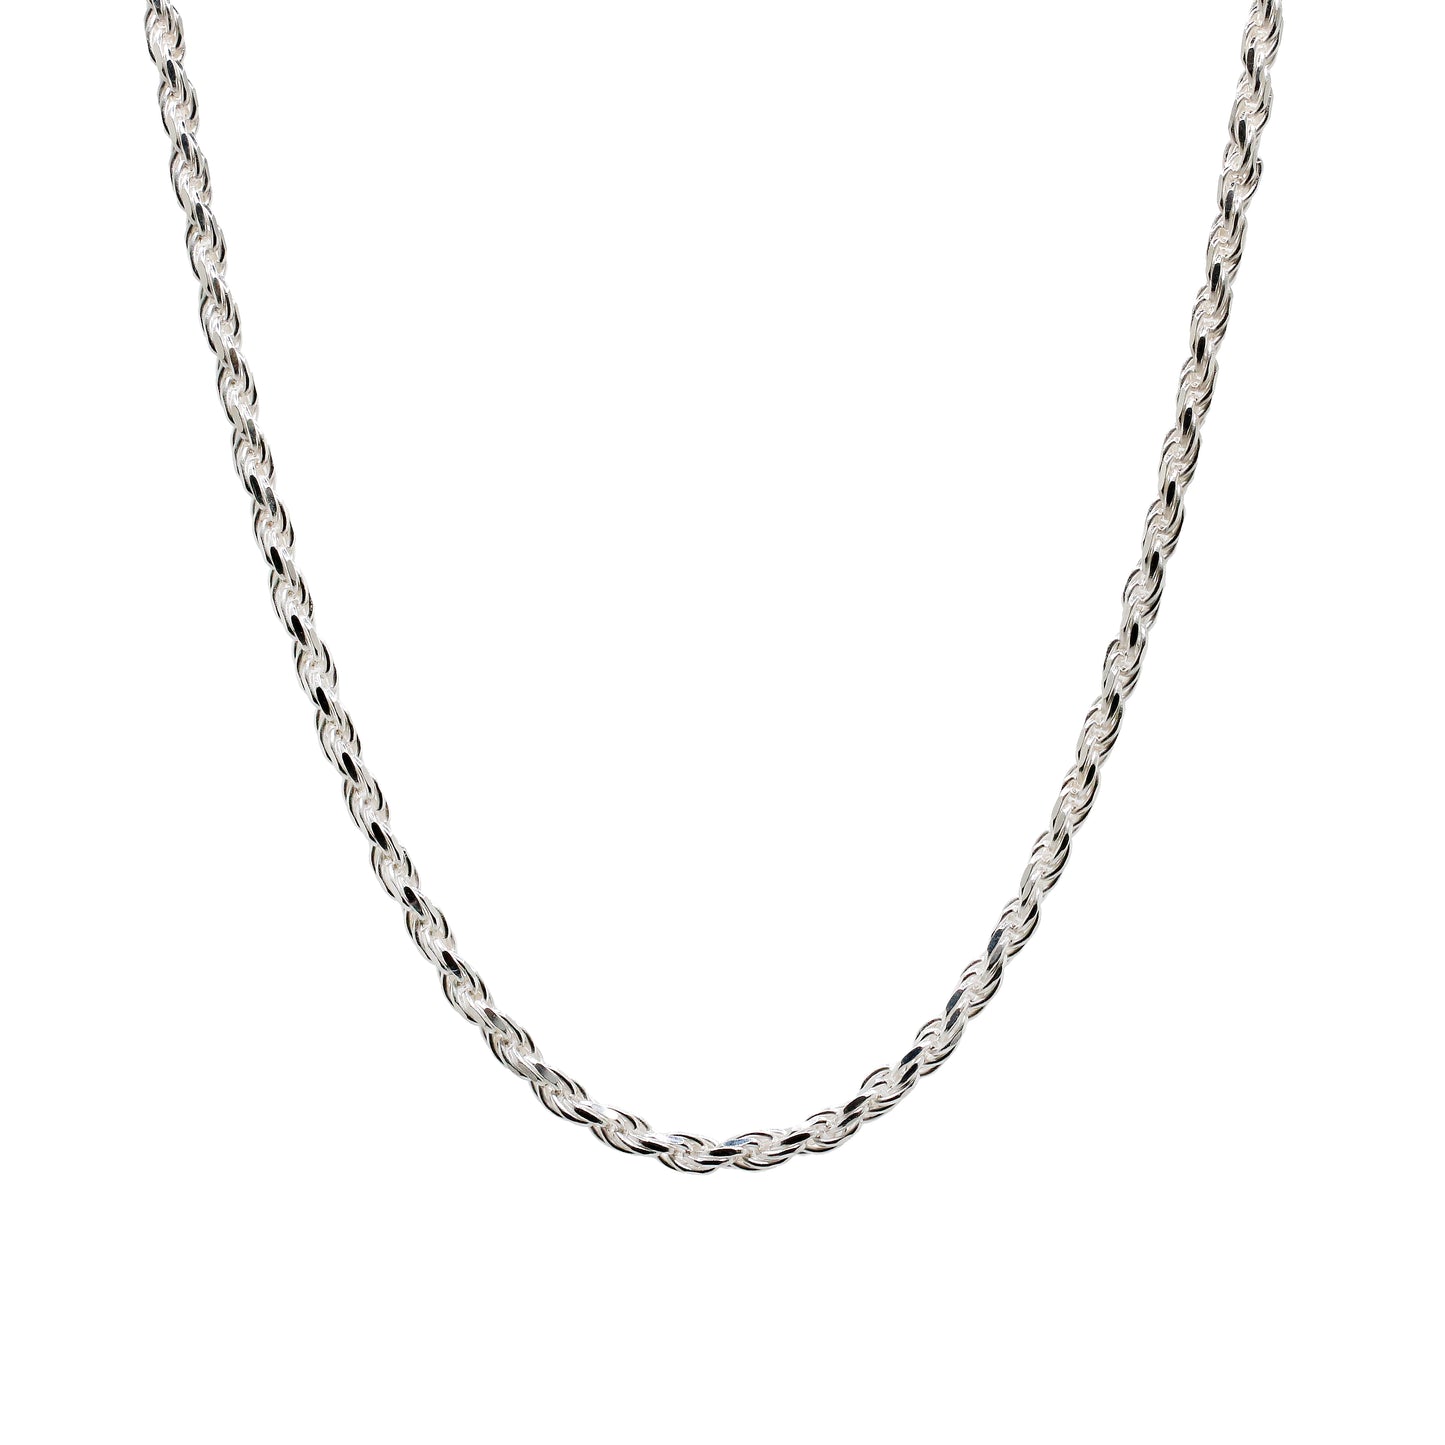 4mm Rope Chain - Real 925 Silver